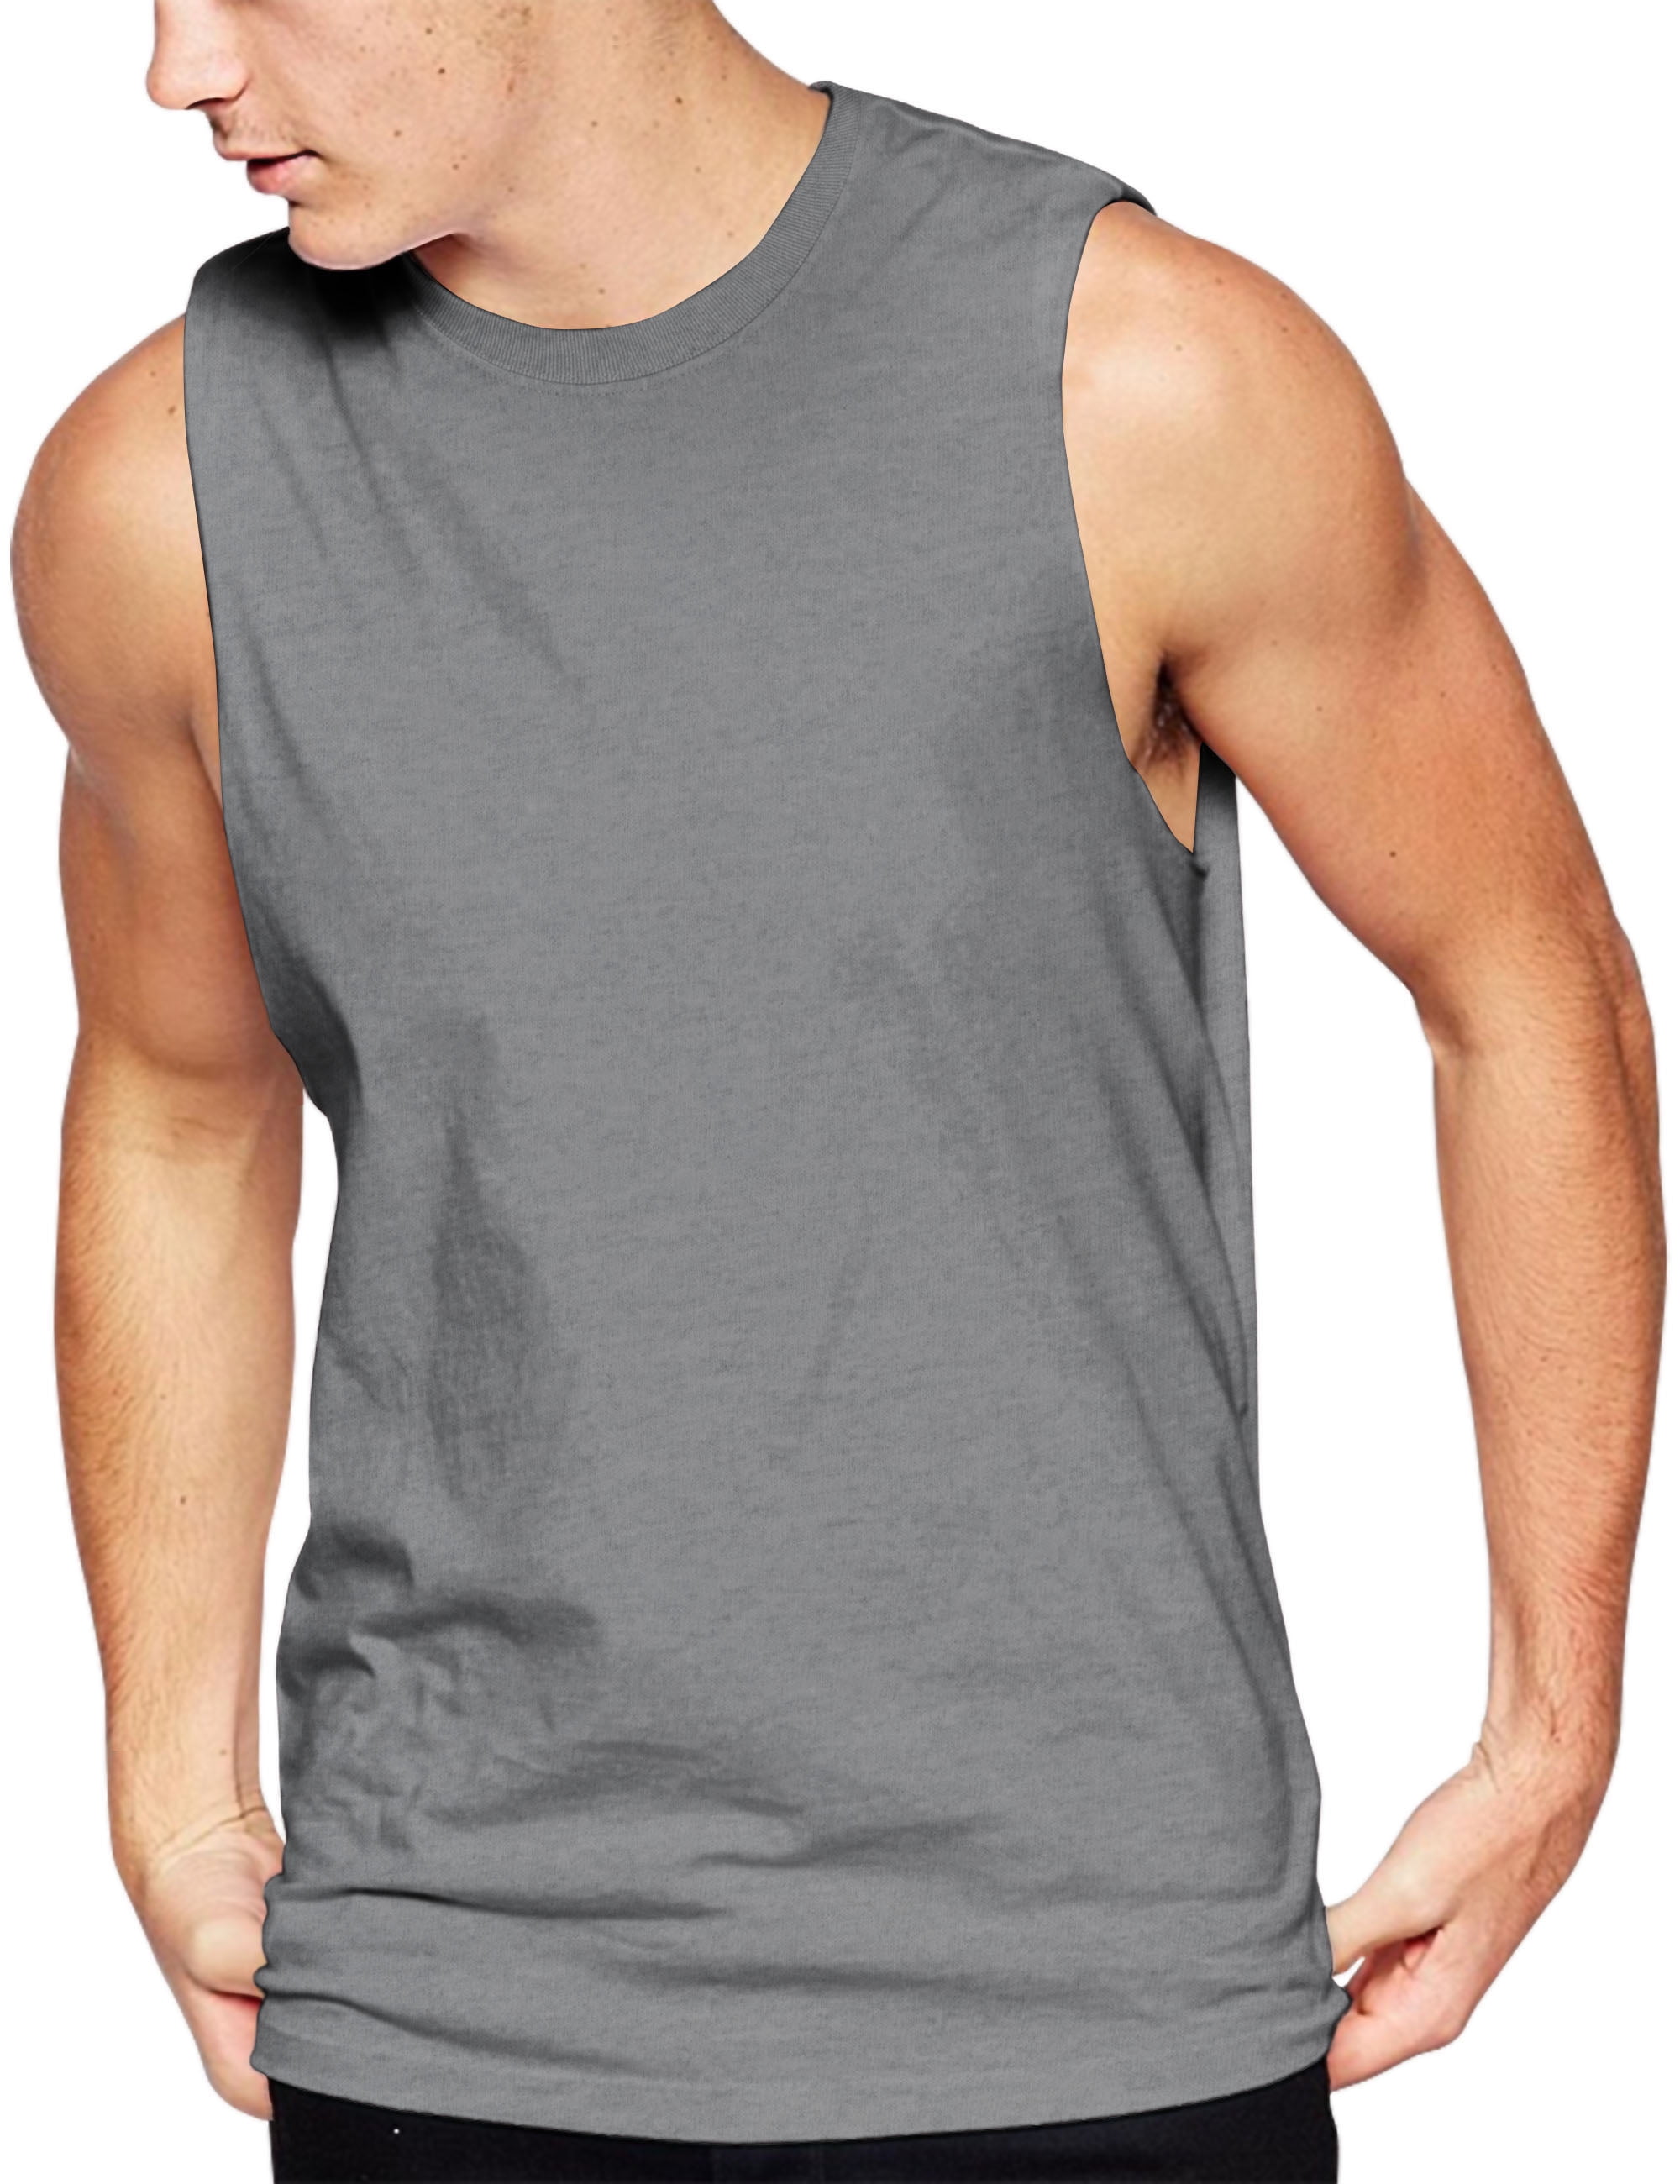 Hat and Beyond Men's Muscle Gym Tank Top Sleeveless T-Shirts